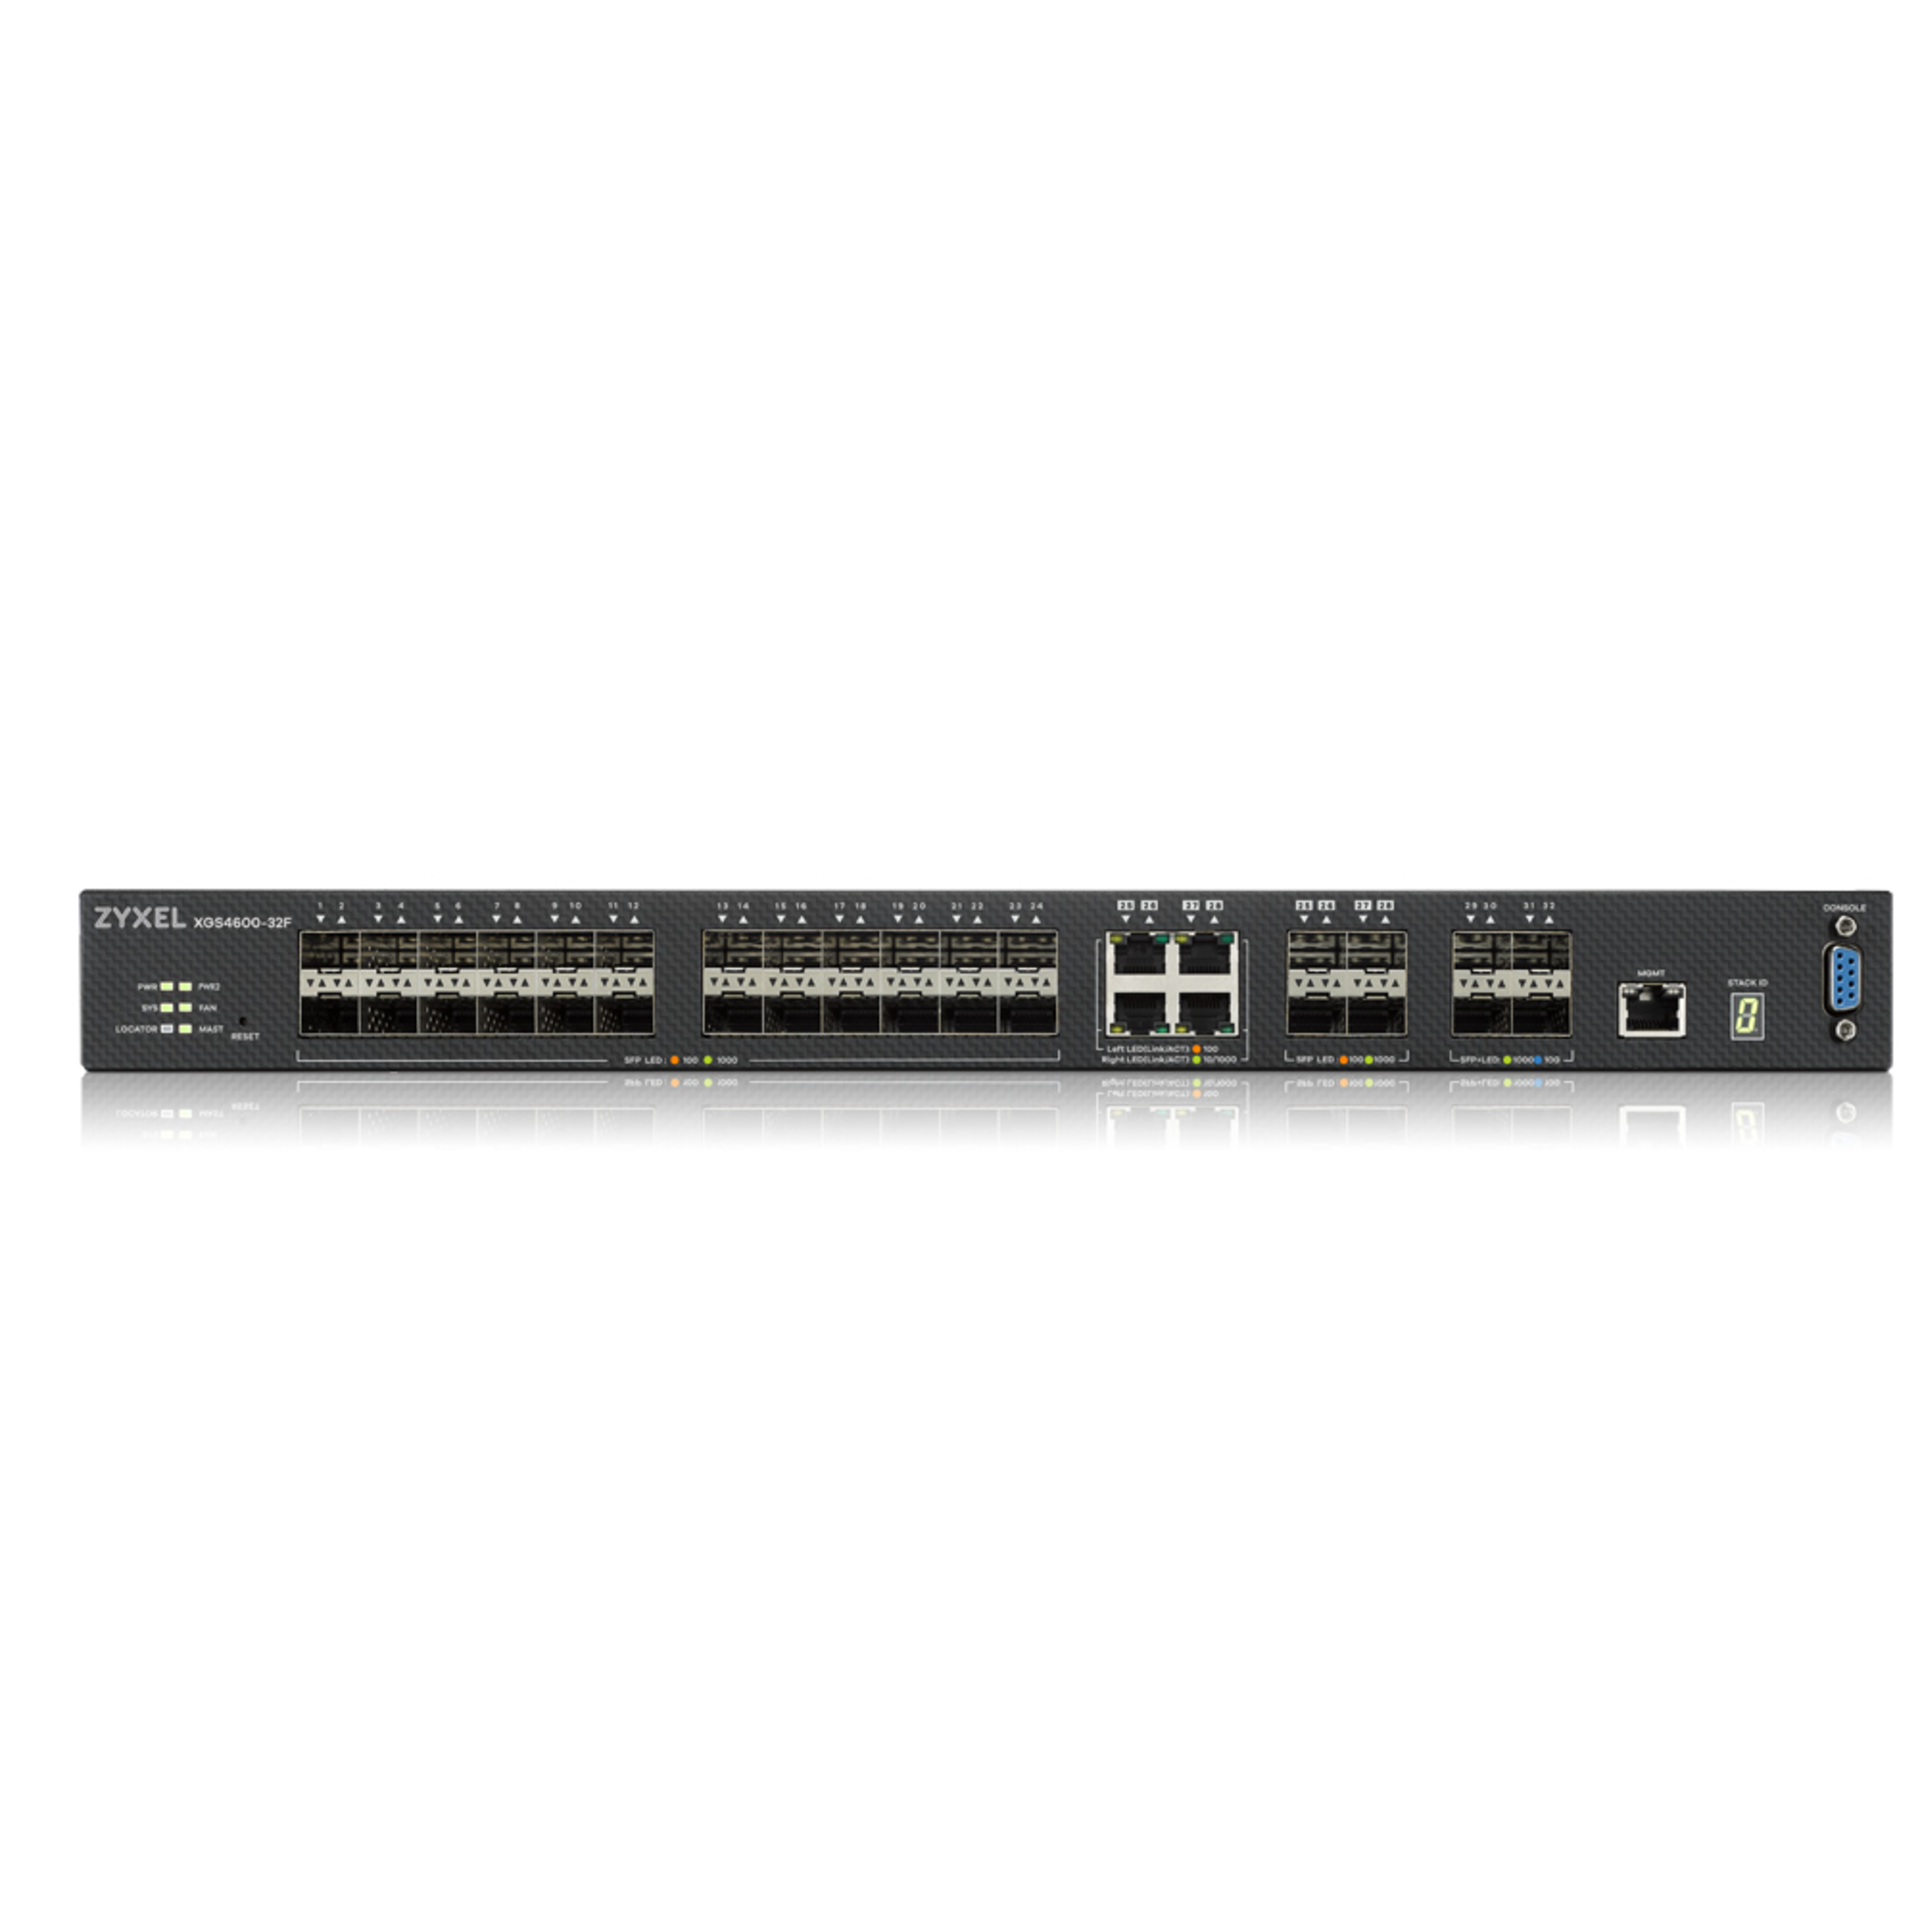 Коммутатор ZYXEL XGS4600-32F L3 Managed Switch, 24 port Gig SFP, 4 dual pers.  and 4x 10G SFP+, stackable, dual PSU